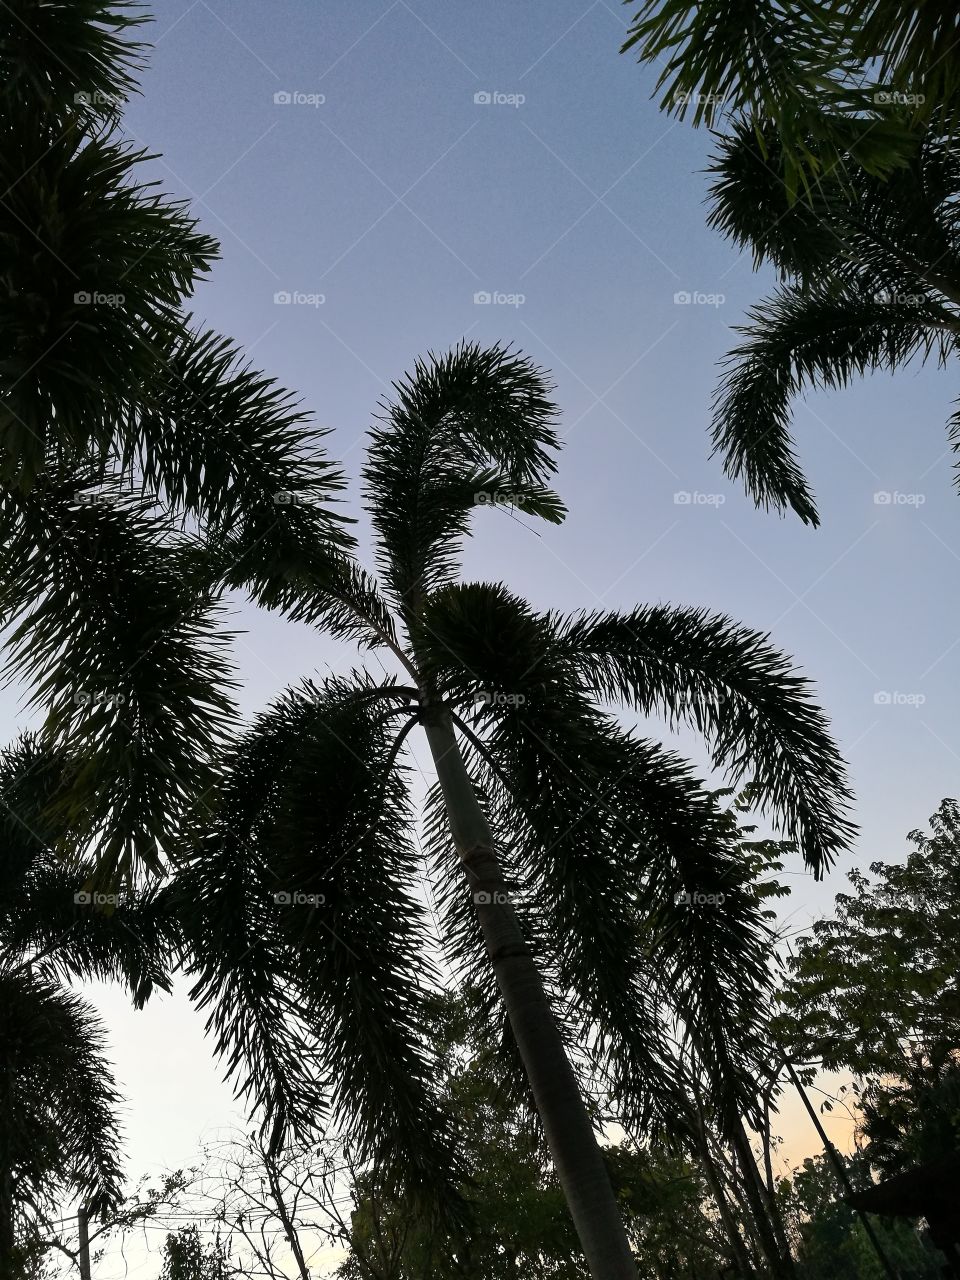 Looking up at palm trees with blue sky